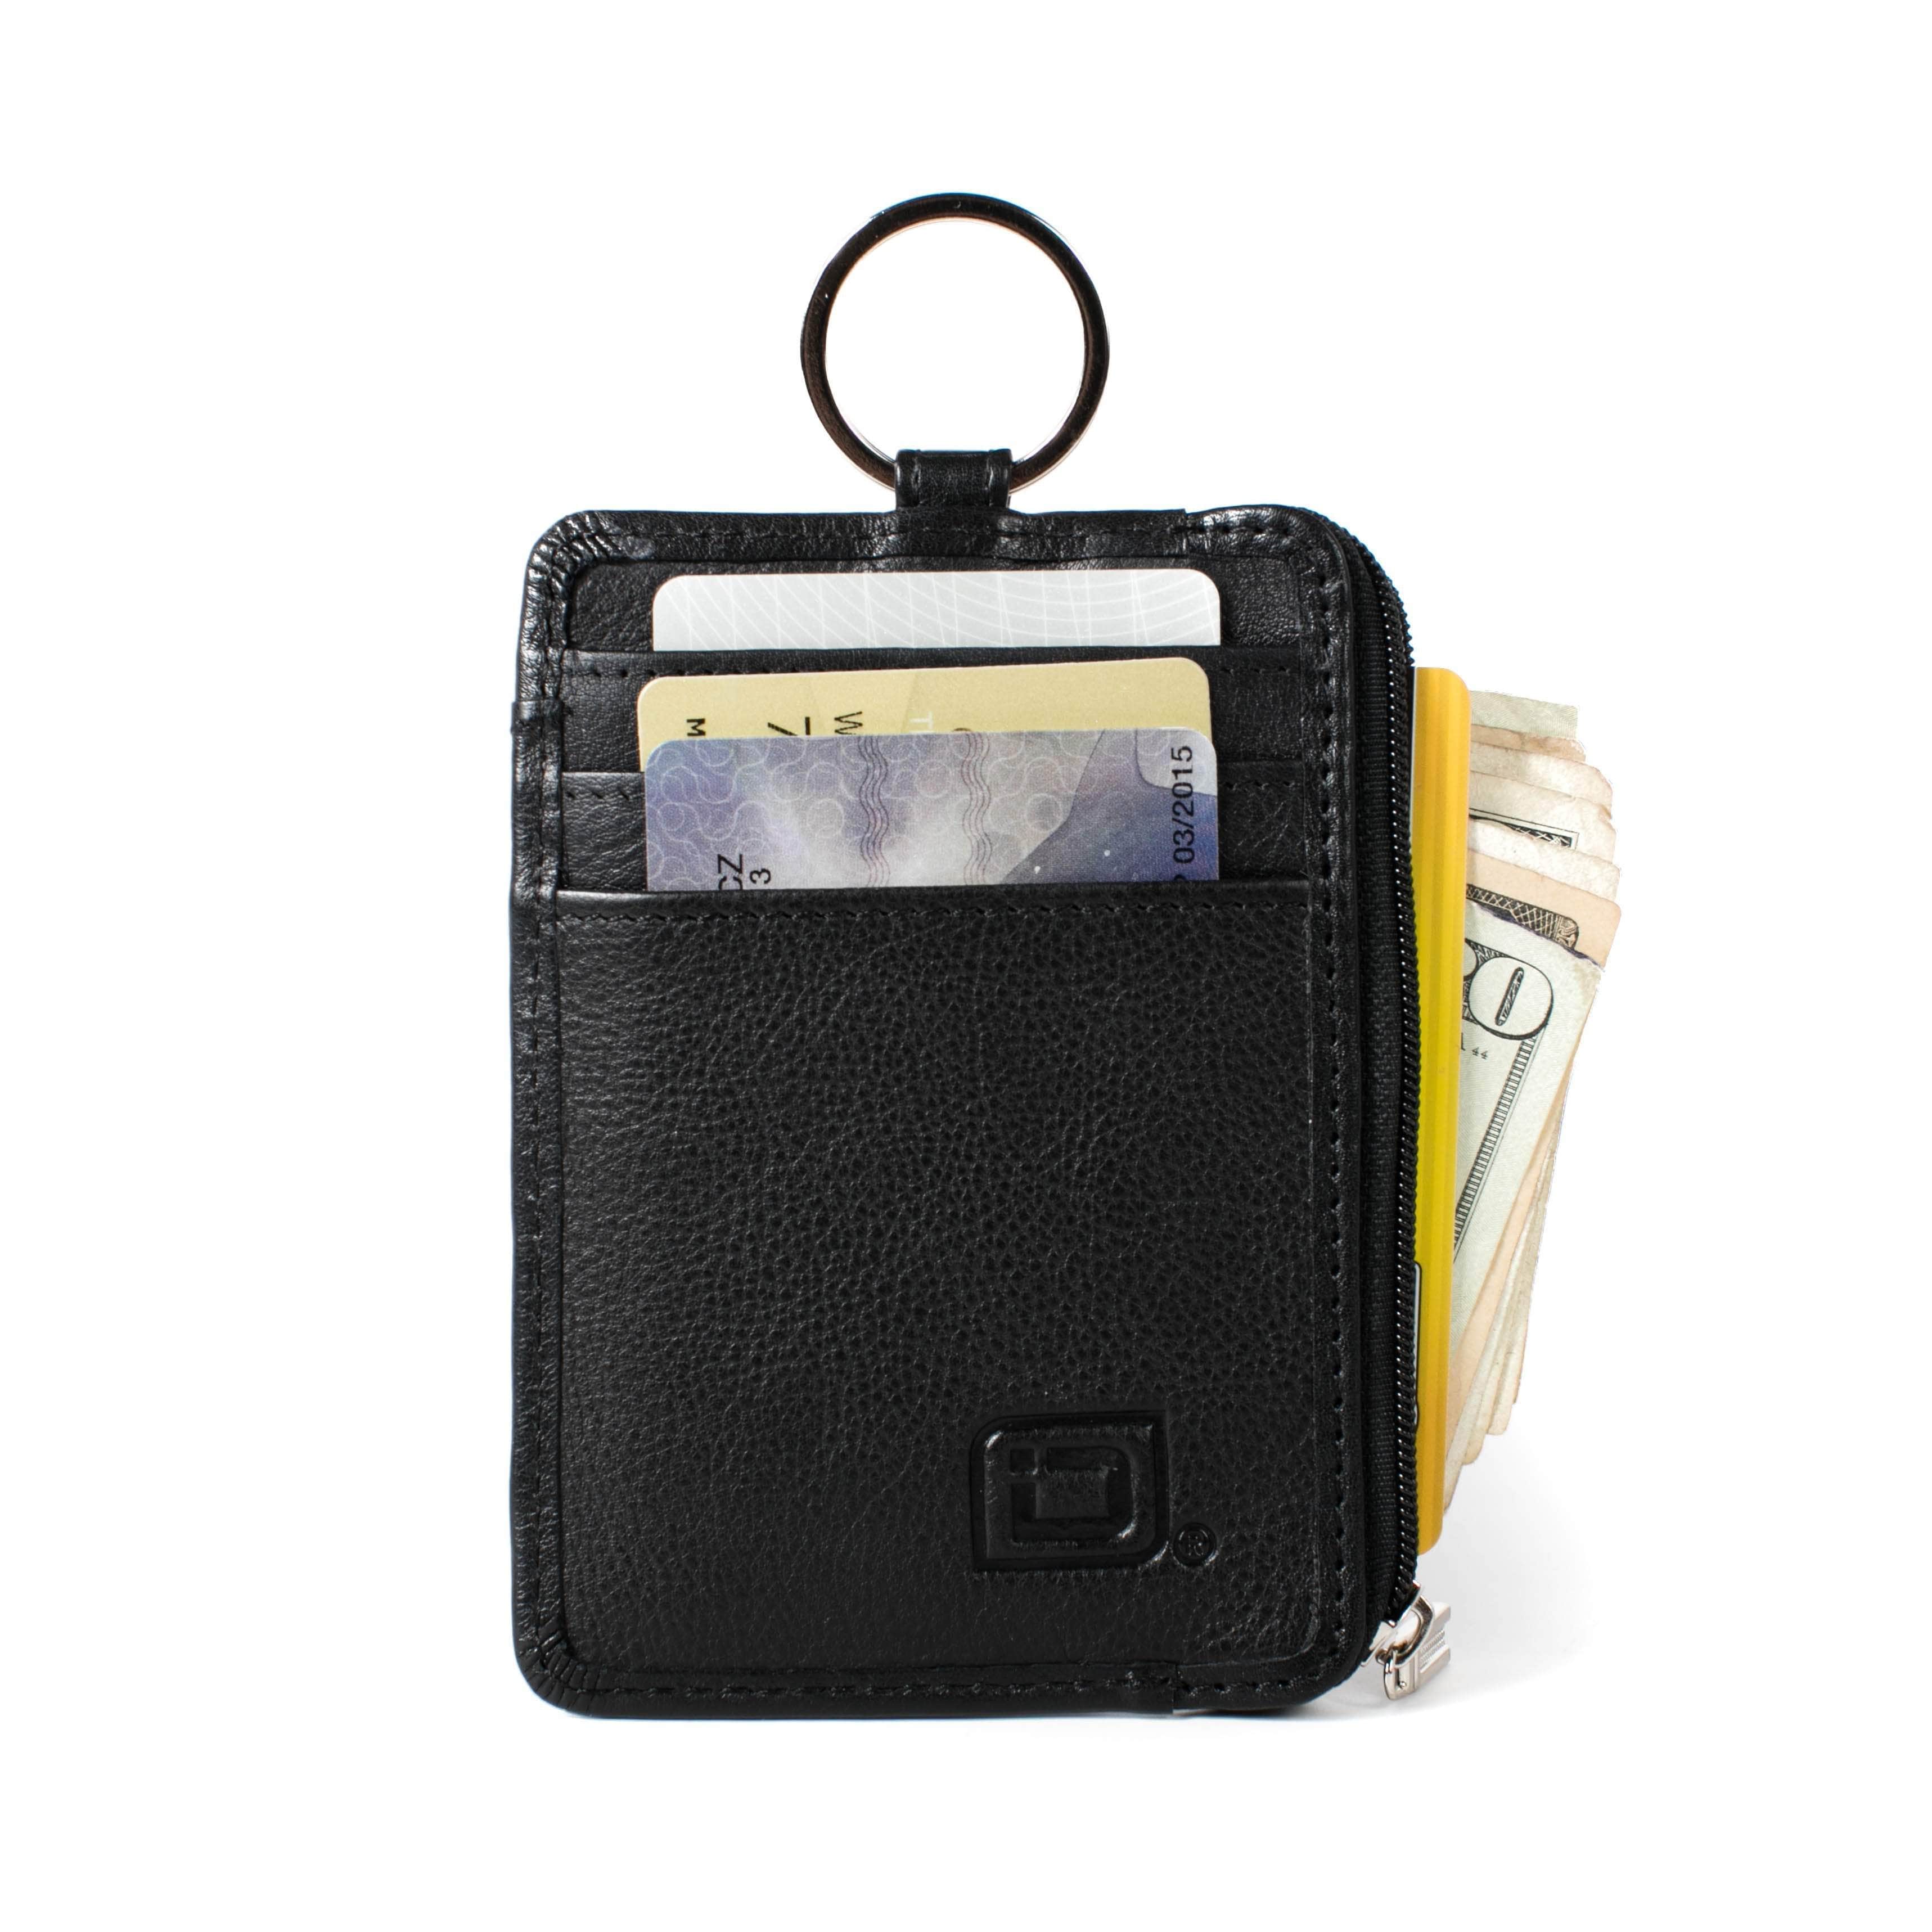 Unisex Black Card Holder with Retractable Keychain